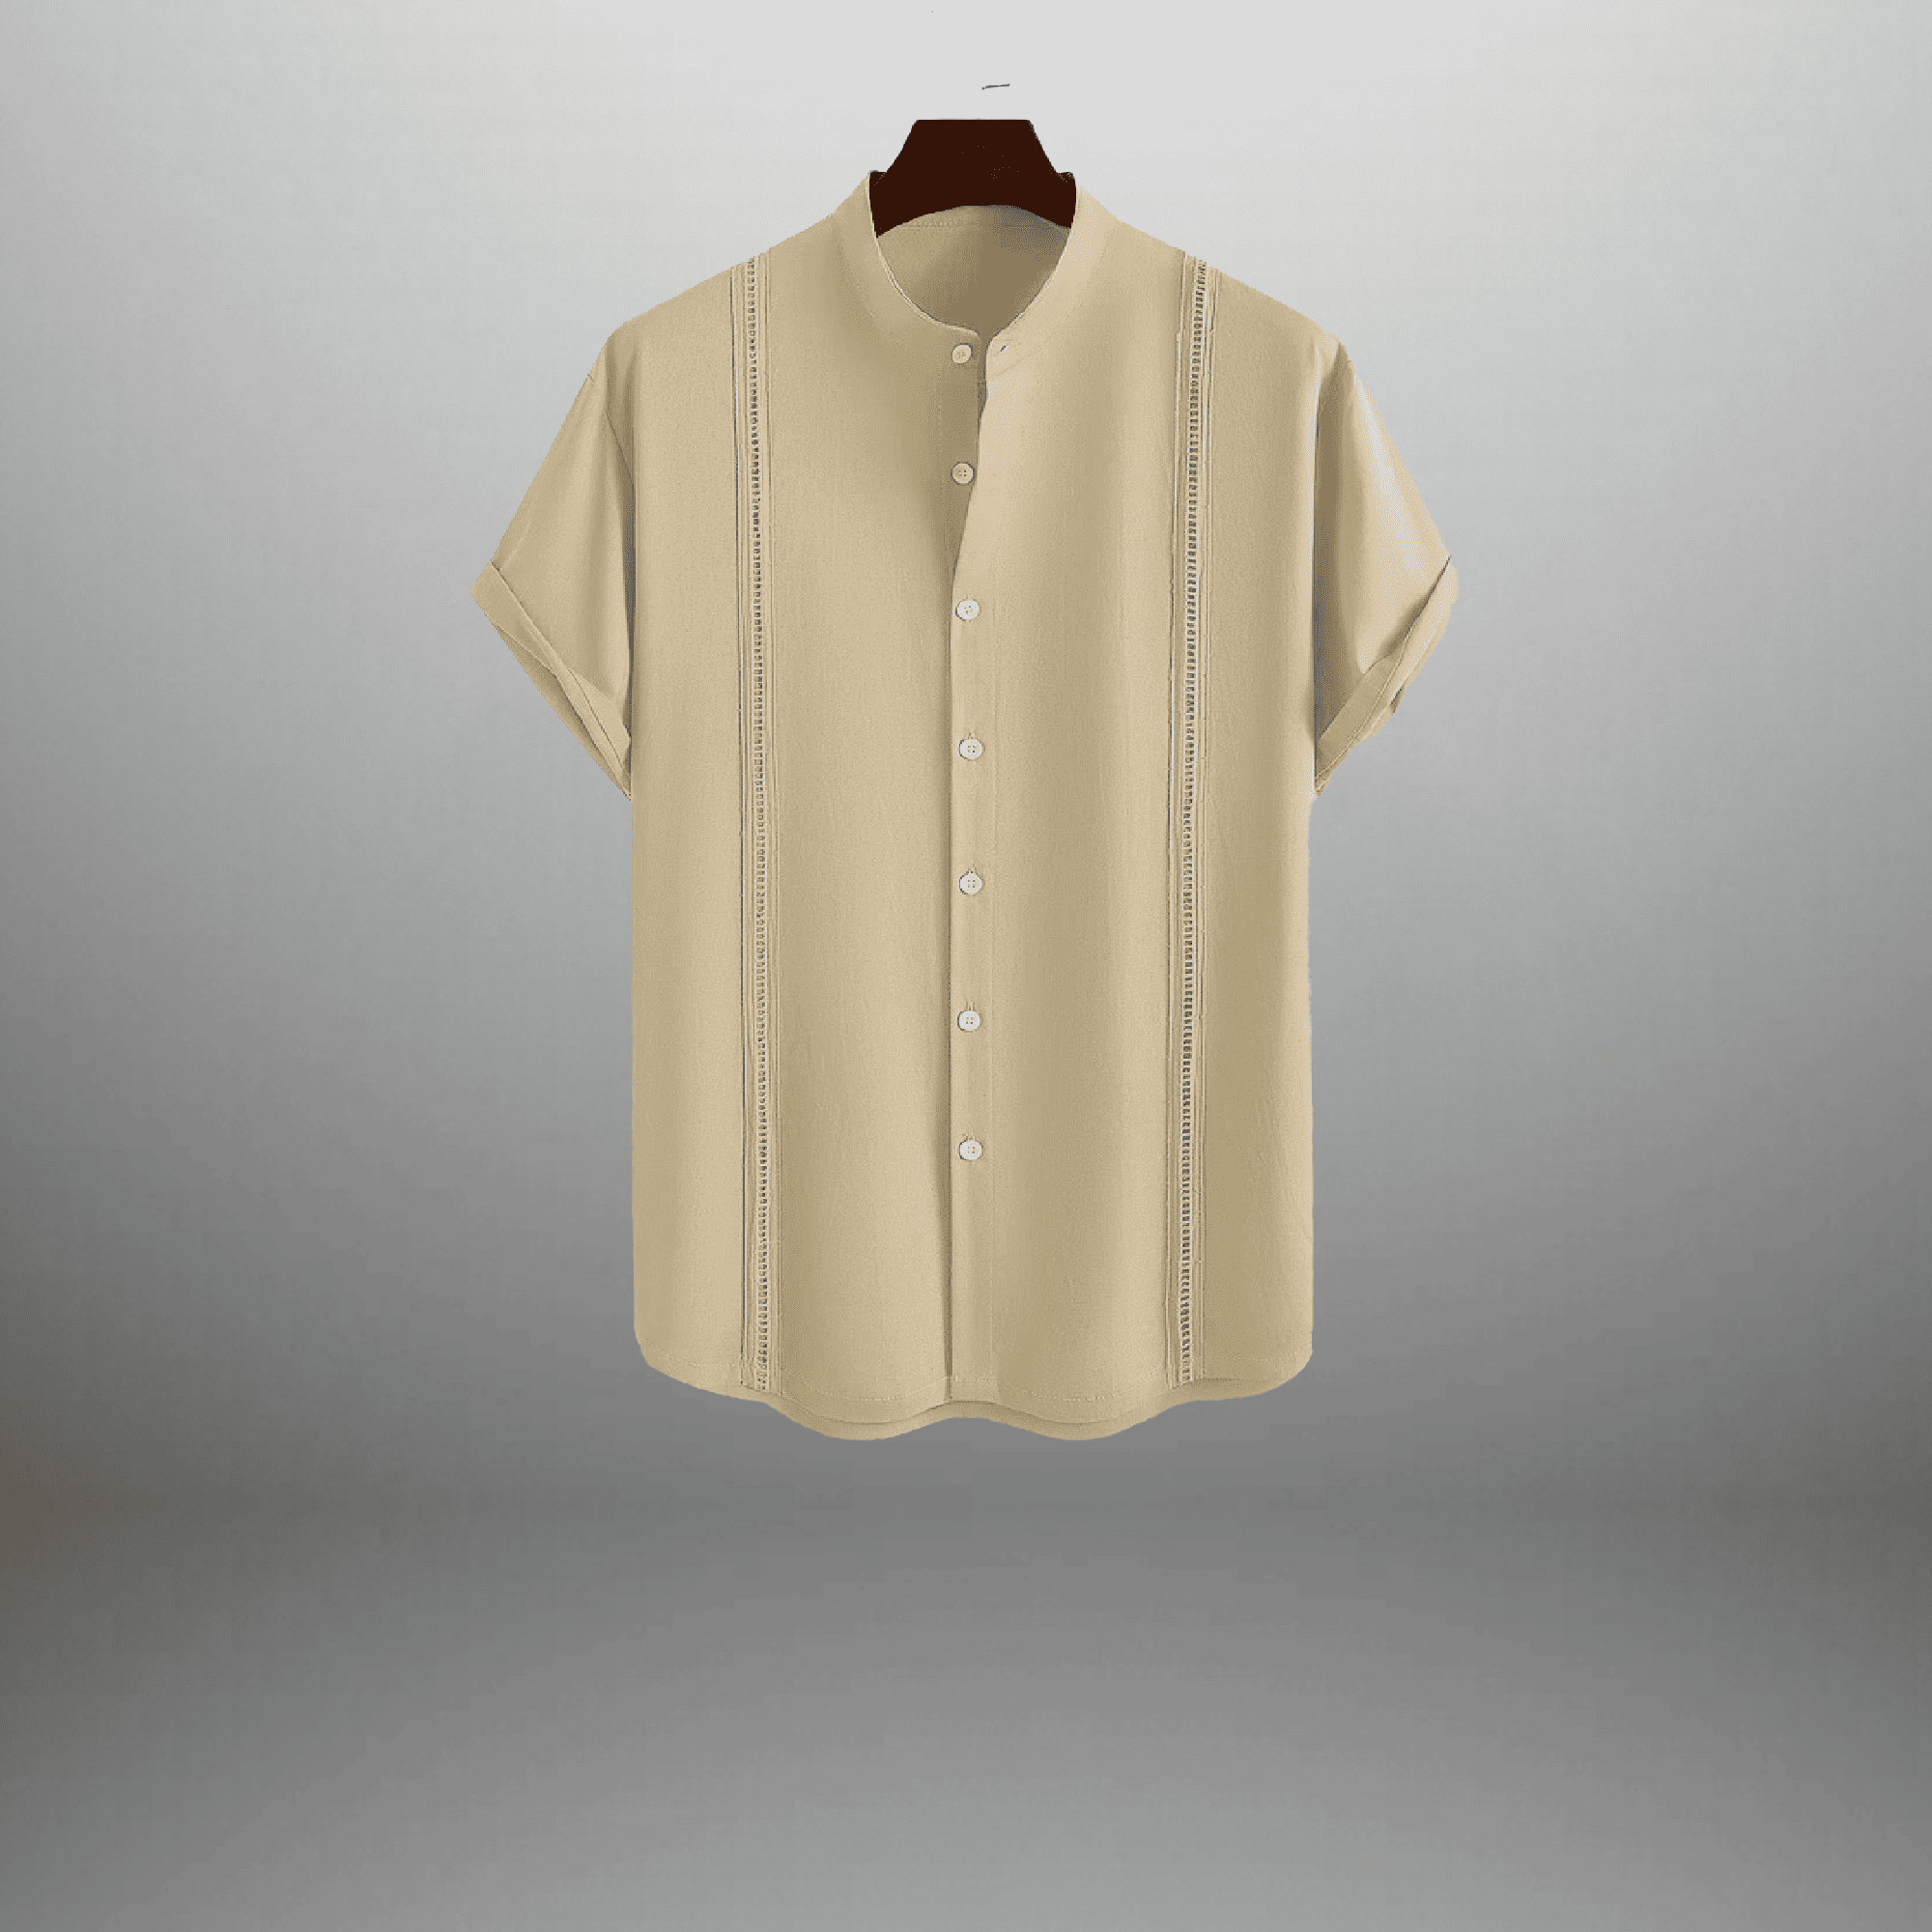 Men's Light Yellow Half sleeve shirt with threadwork in the front-RMS011